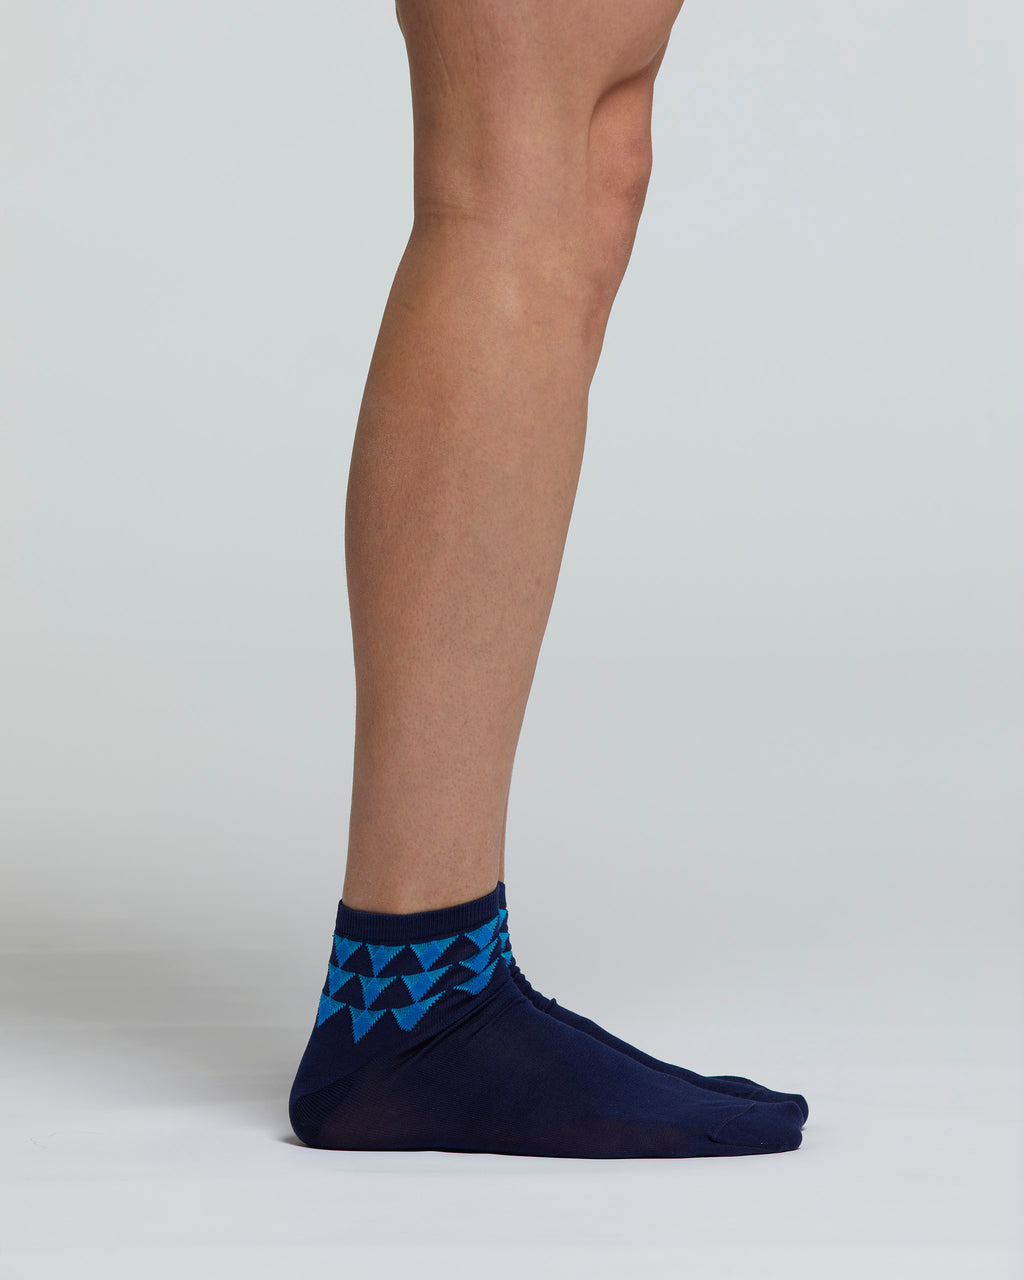 BAMBÙ SOCKS WITH ANKLE COLOURED PATTERN 